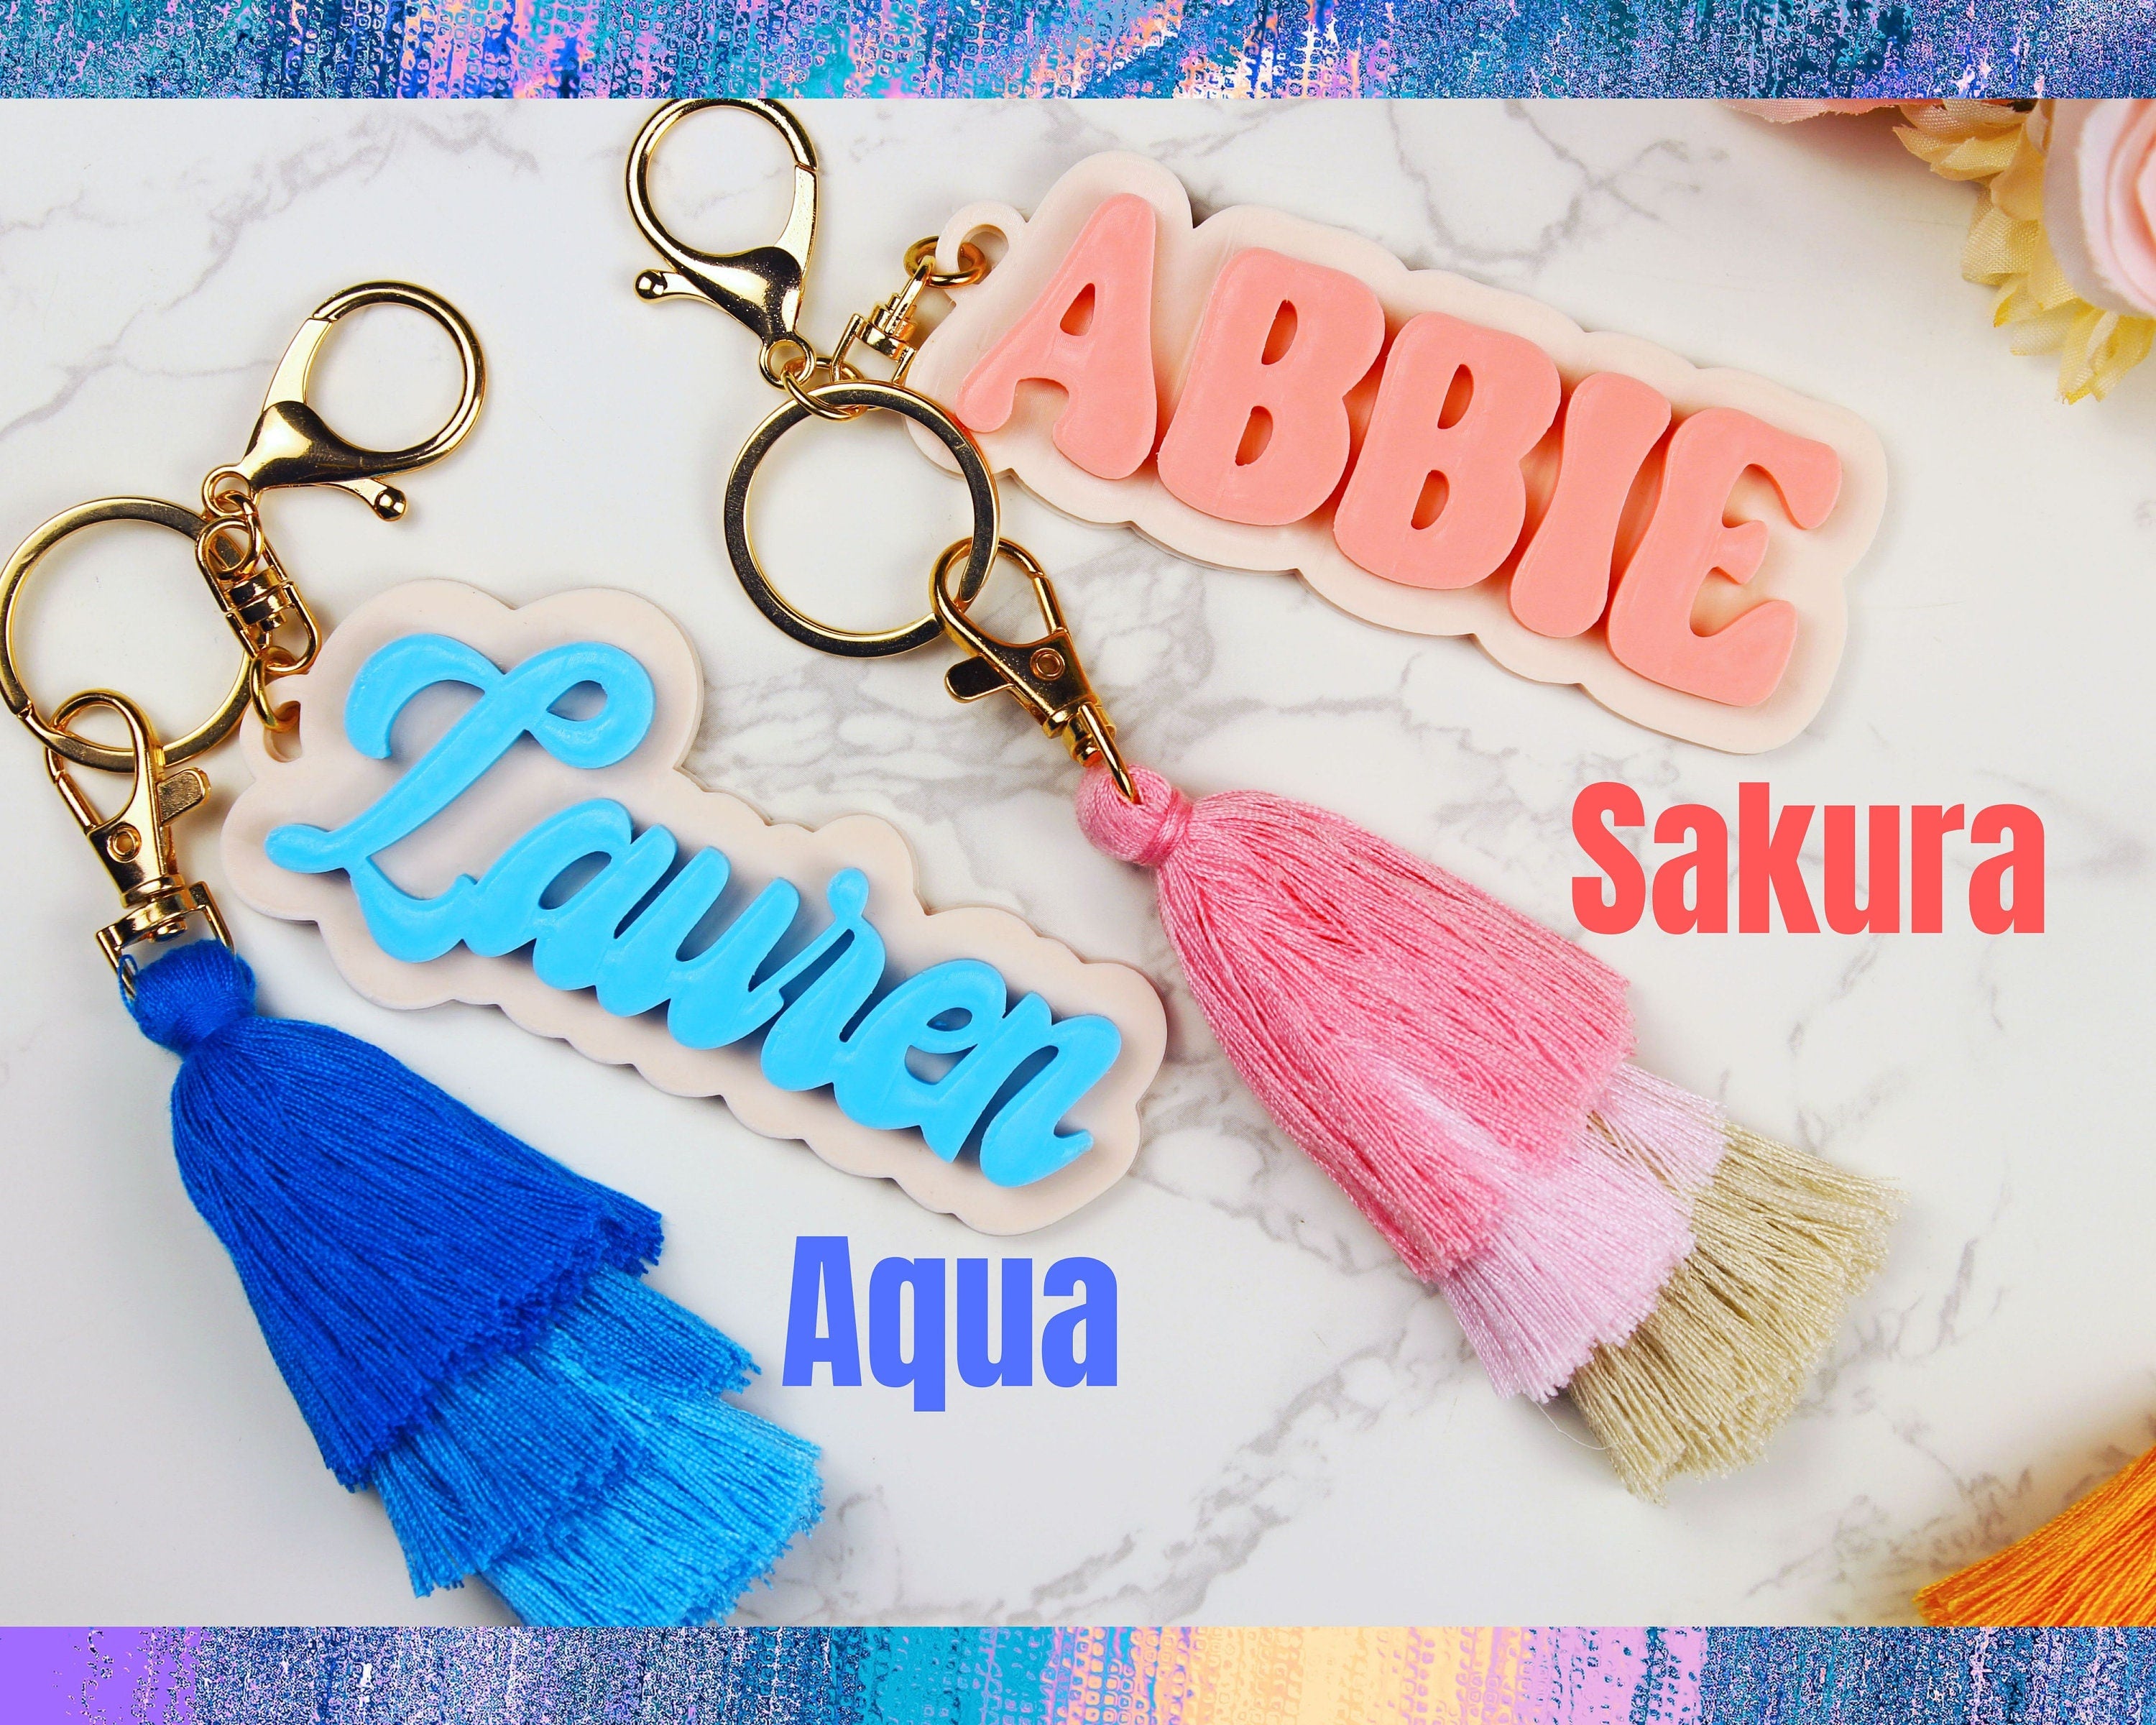 3D Name Plate Keychain with Tassel. Personalized Retro Name Tag Keychain. Colorful Name Plate Keychain. Personalized Name Tassel Keychain .